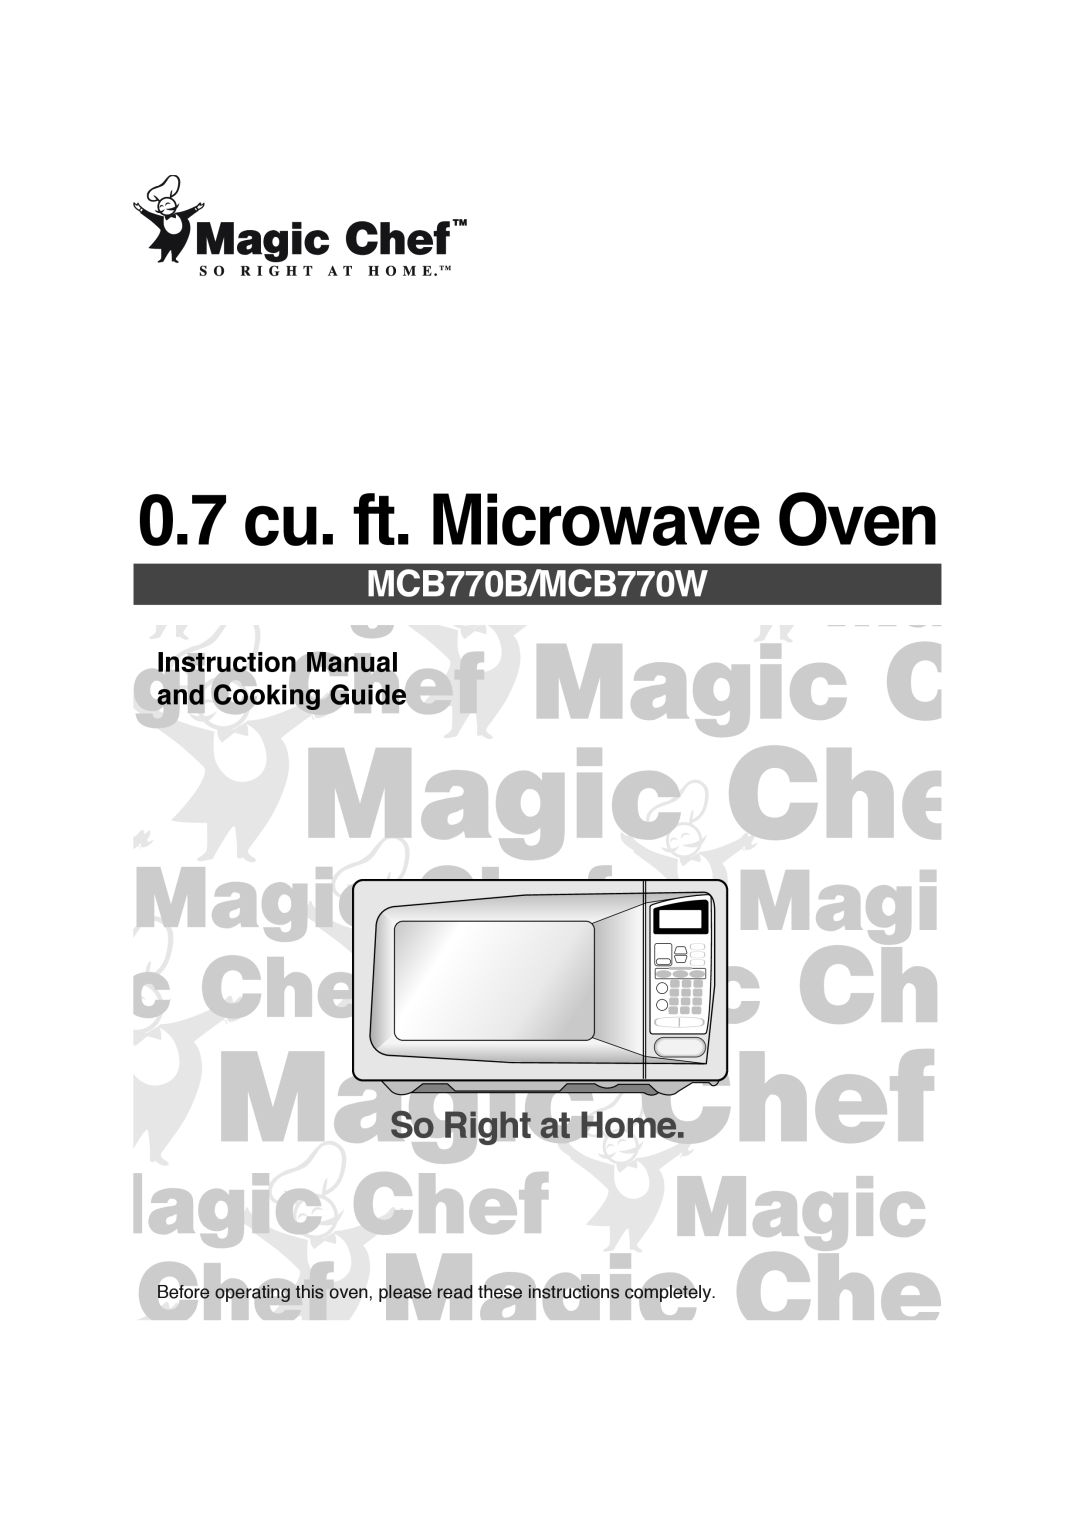 Magic Chef instruction manual 0.7 cu. ft. Microwave Oven, MCB770B/MCB770W, So Right at Home 